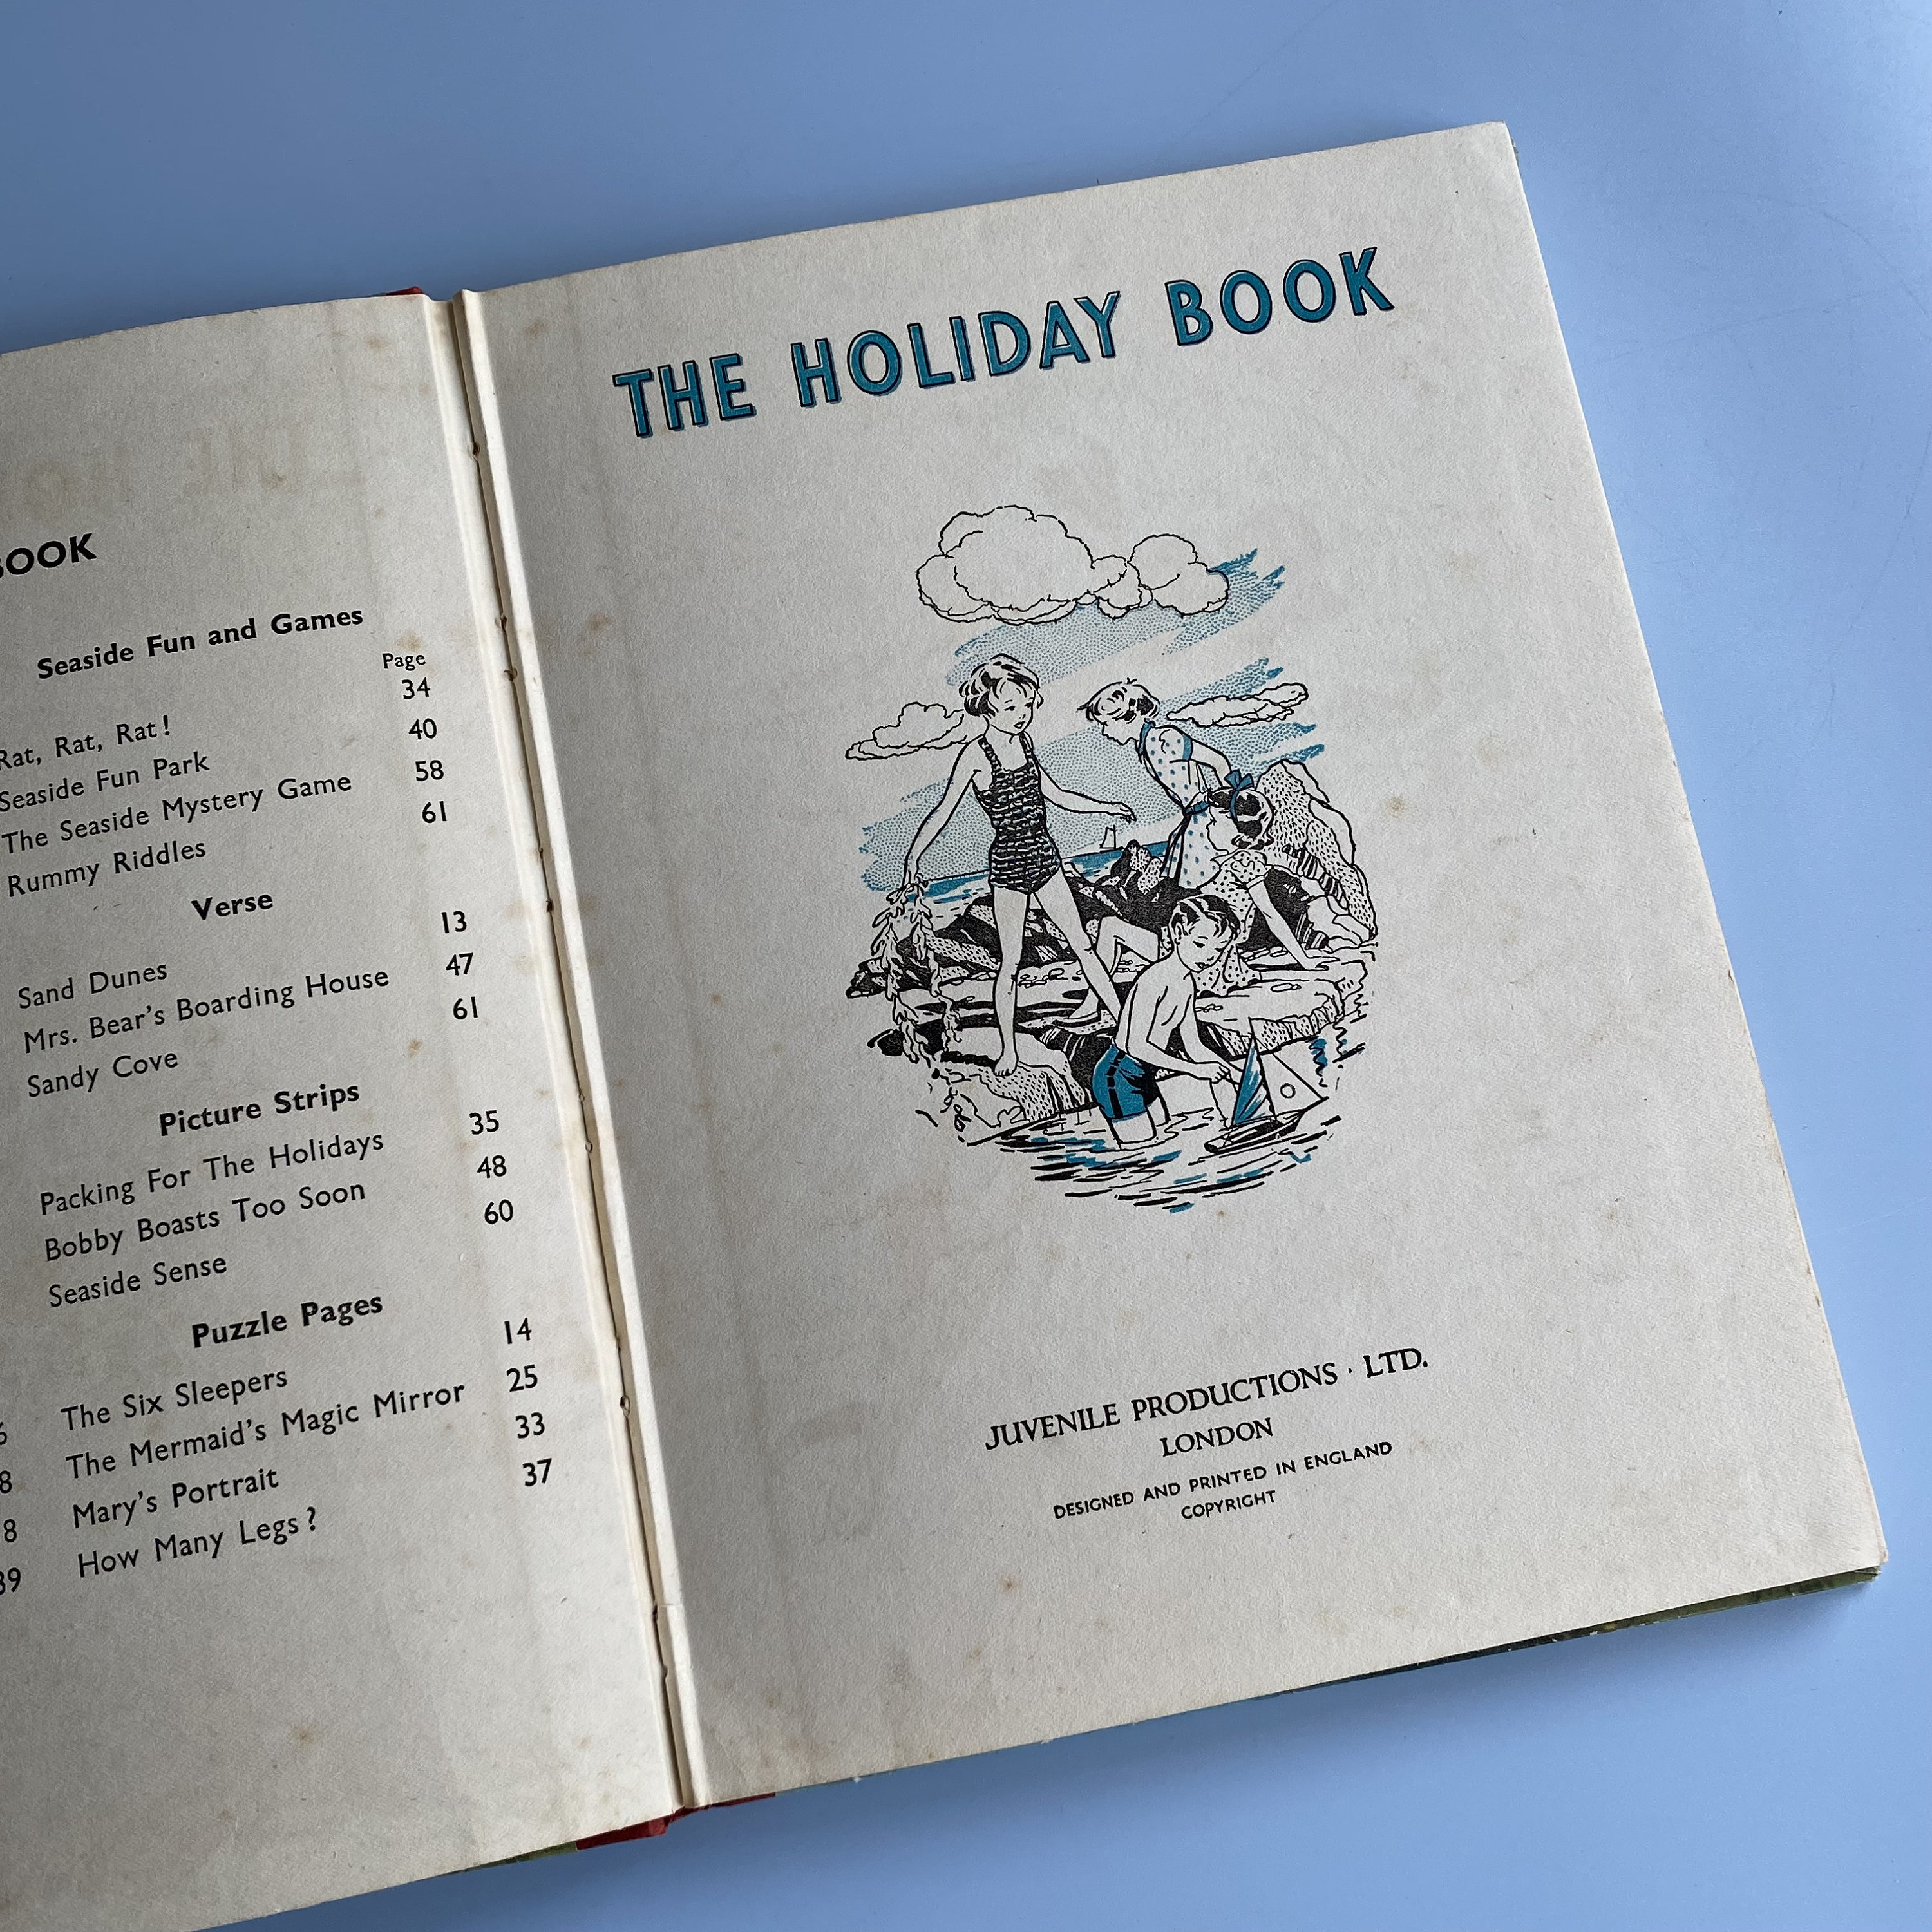 Classic Designer Books – The Holiday co